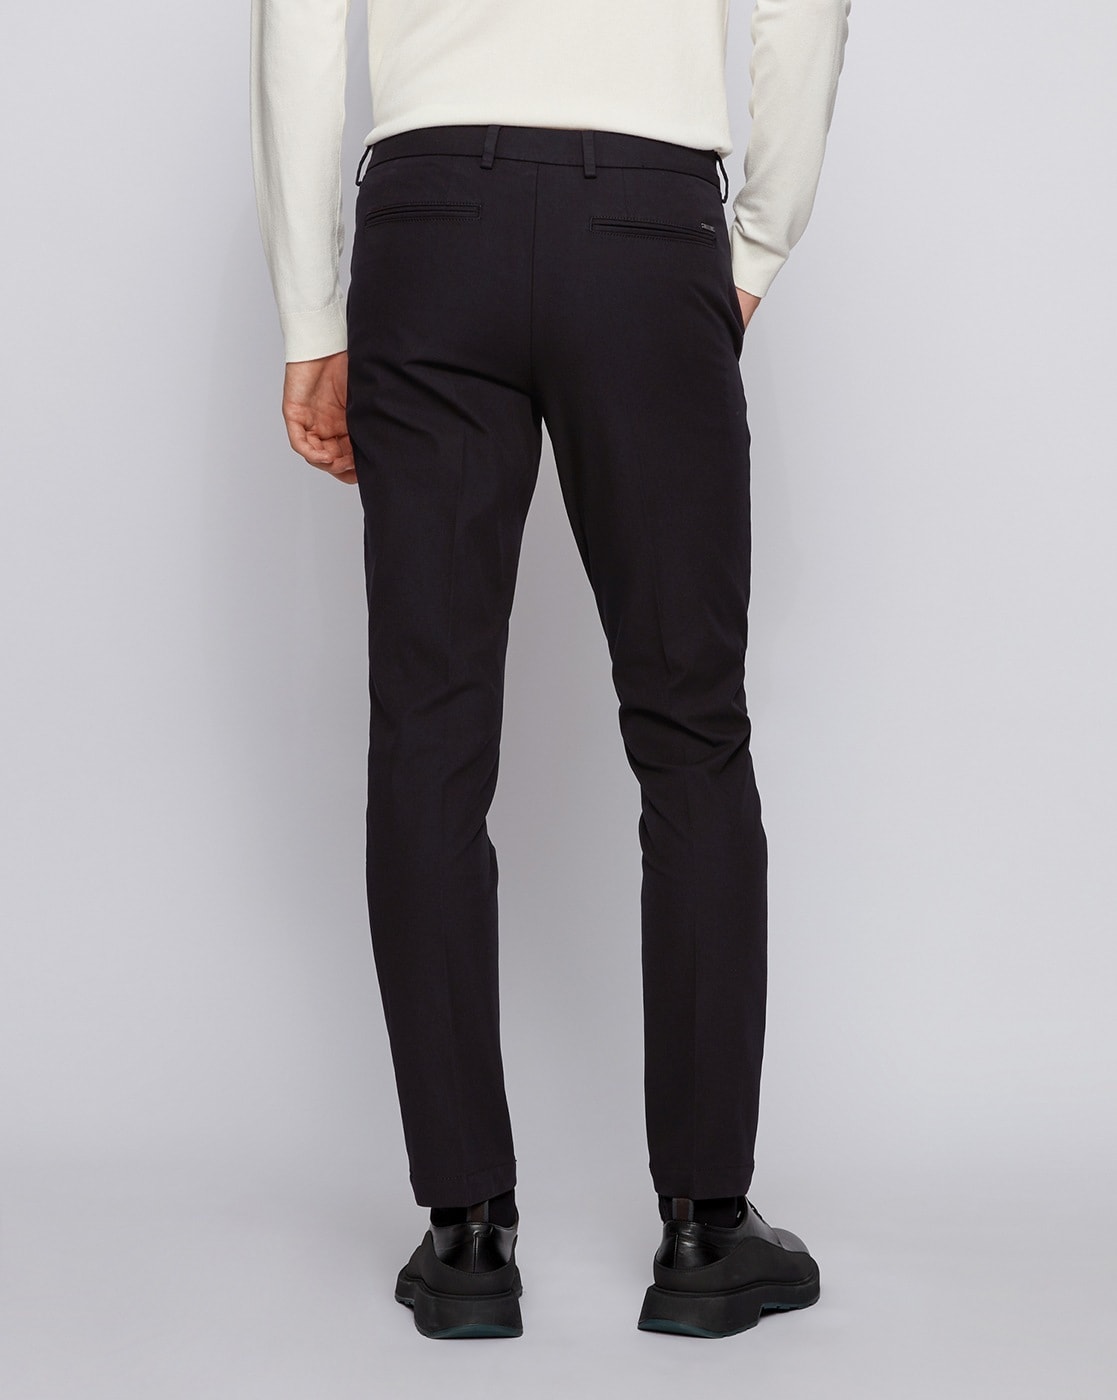 Buy Latest Travel Trousers For Men Online at Best Price  House of Stori